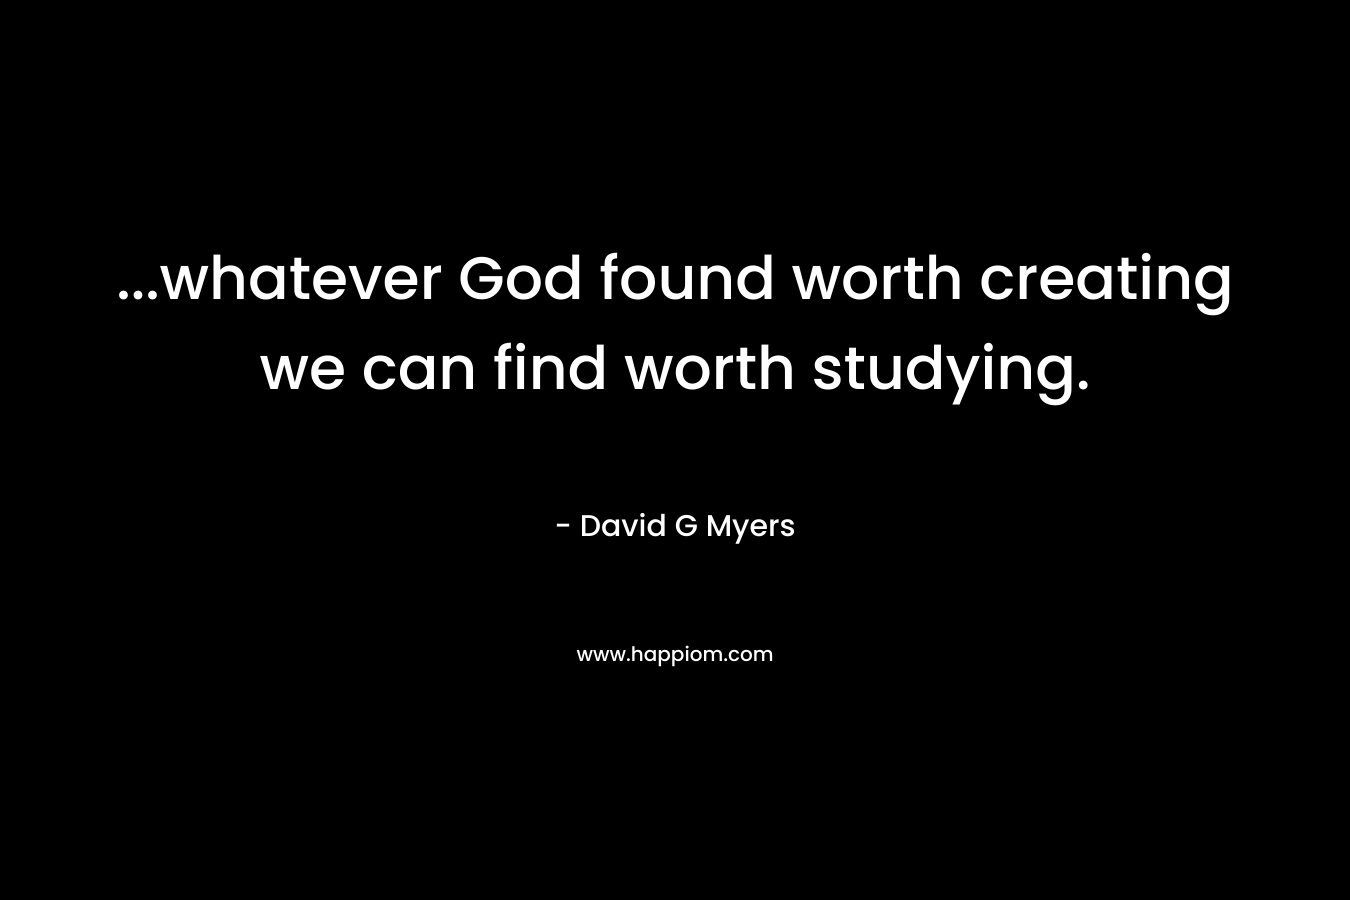 ...whatever God found worth creating we can find worth studying.